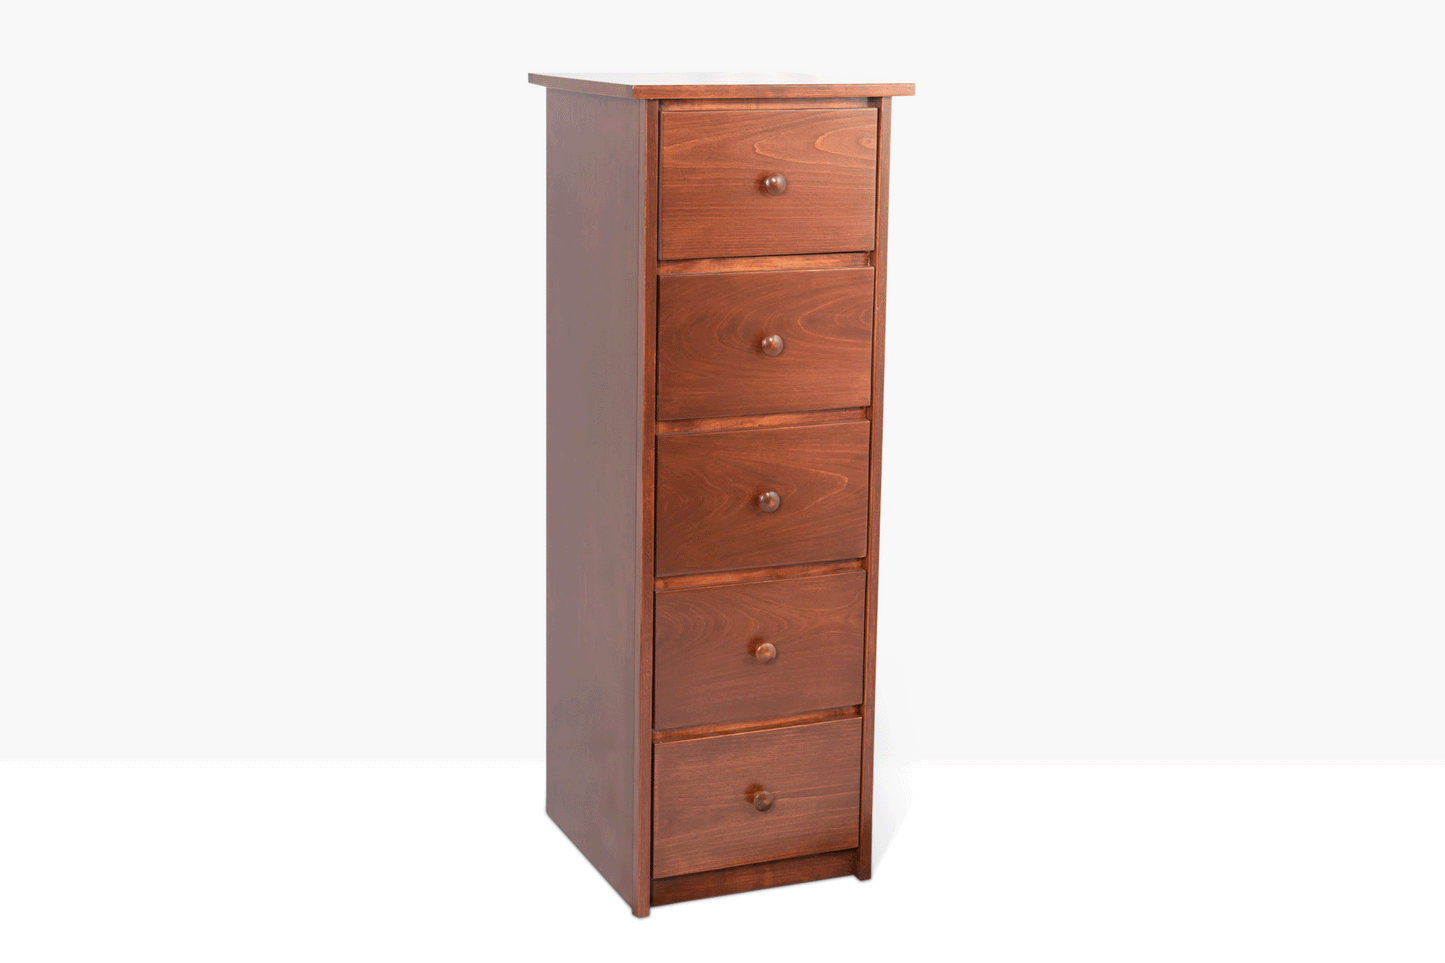 Evergreen Lingerie Chest is built from Pine and birch and features five drawers, shown open to show storage capacity.  Pictured in Traditional Cherry finish.